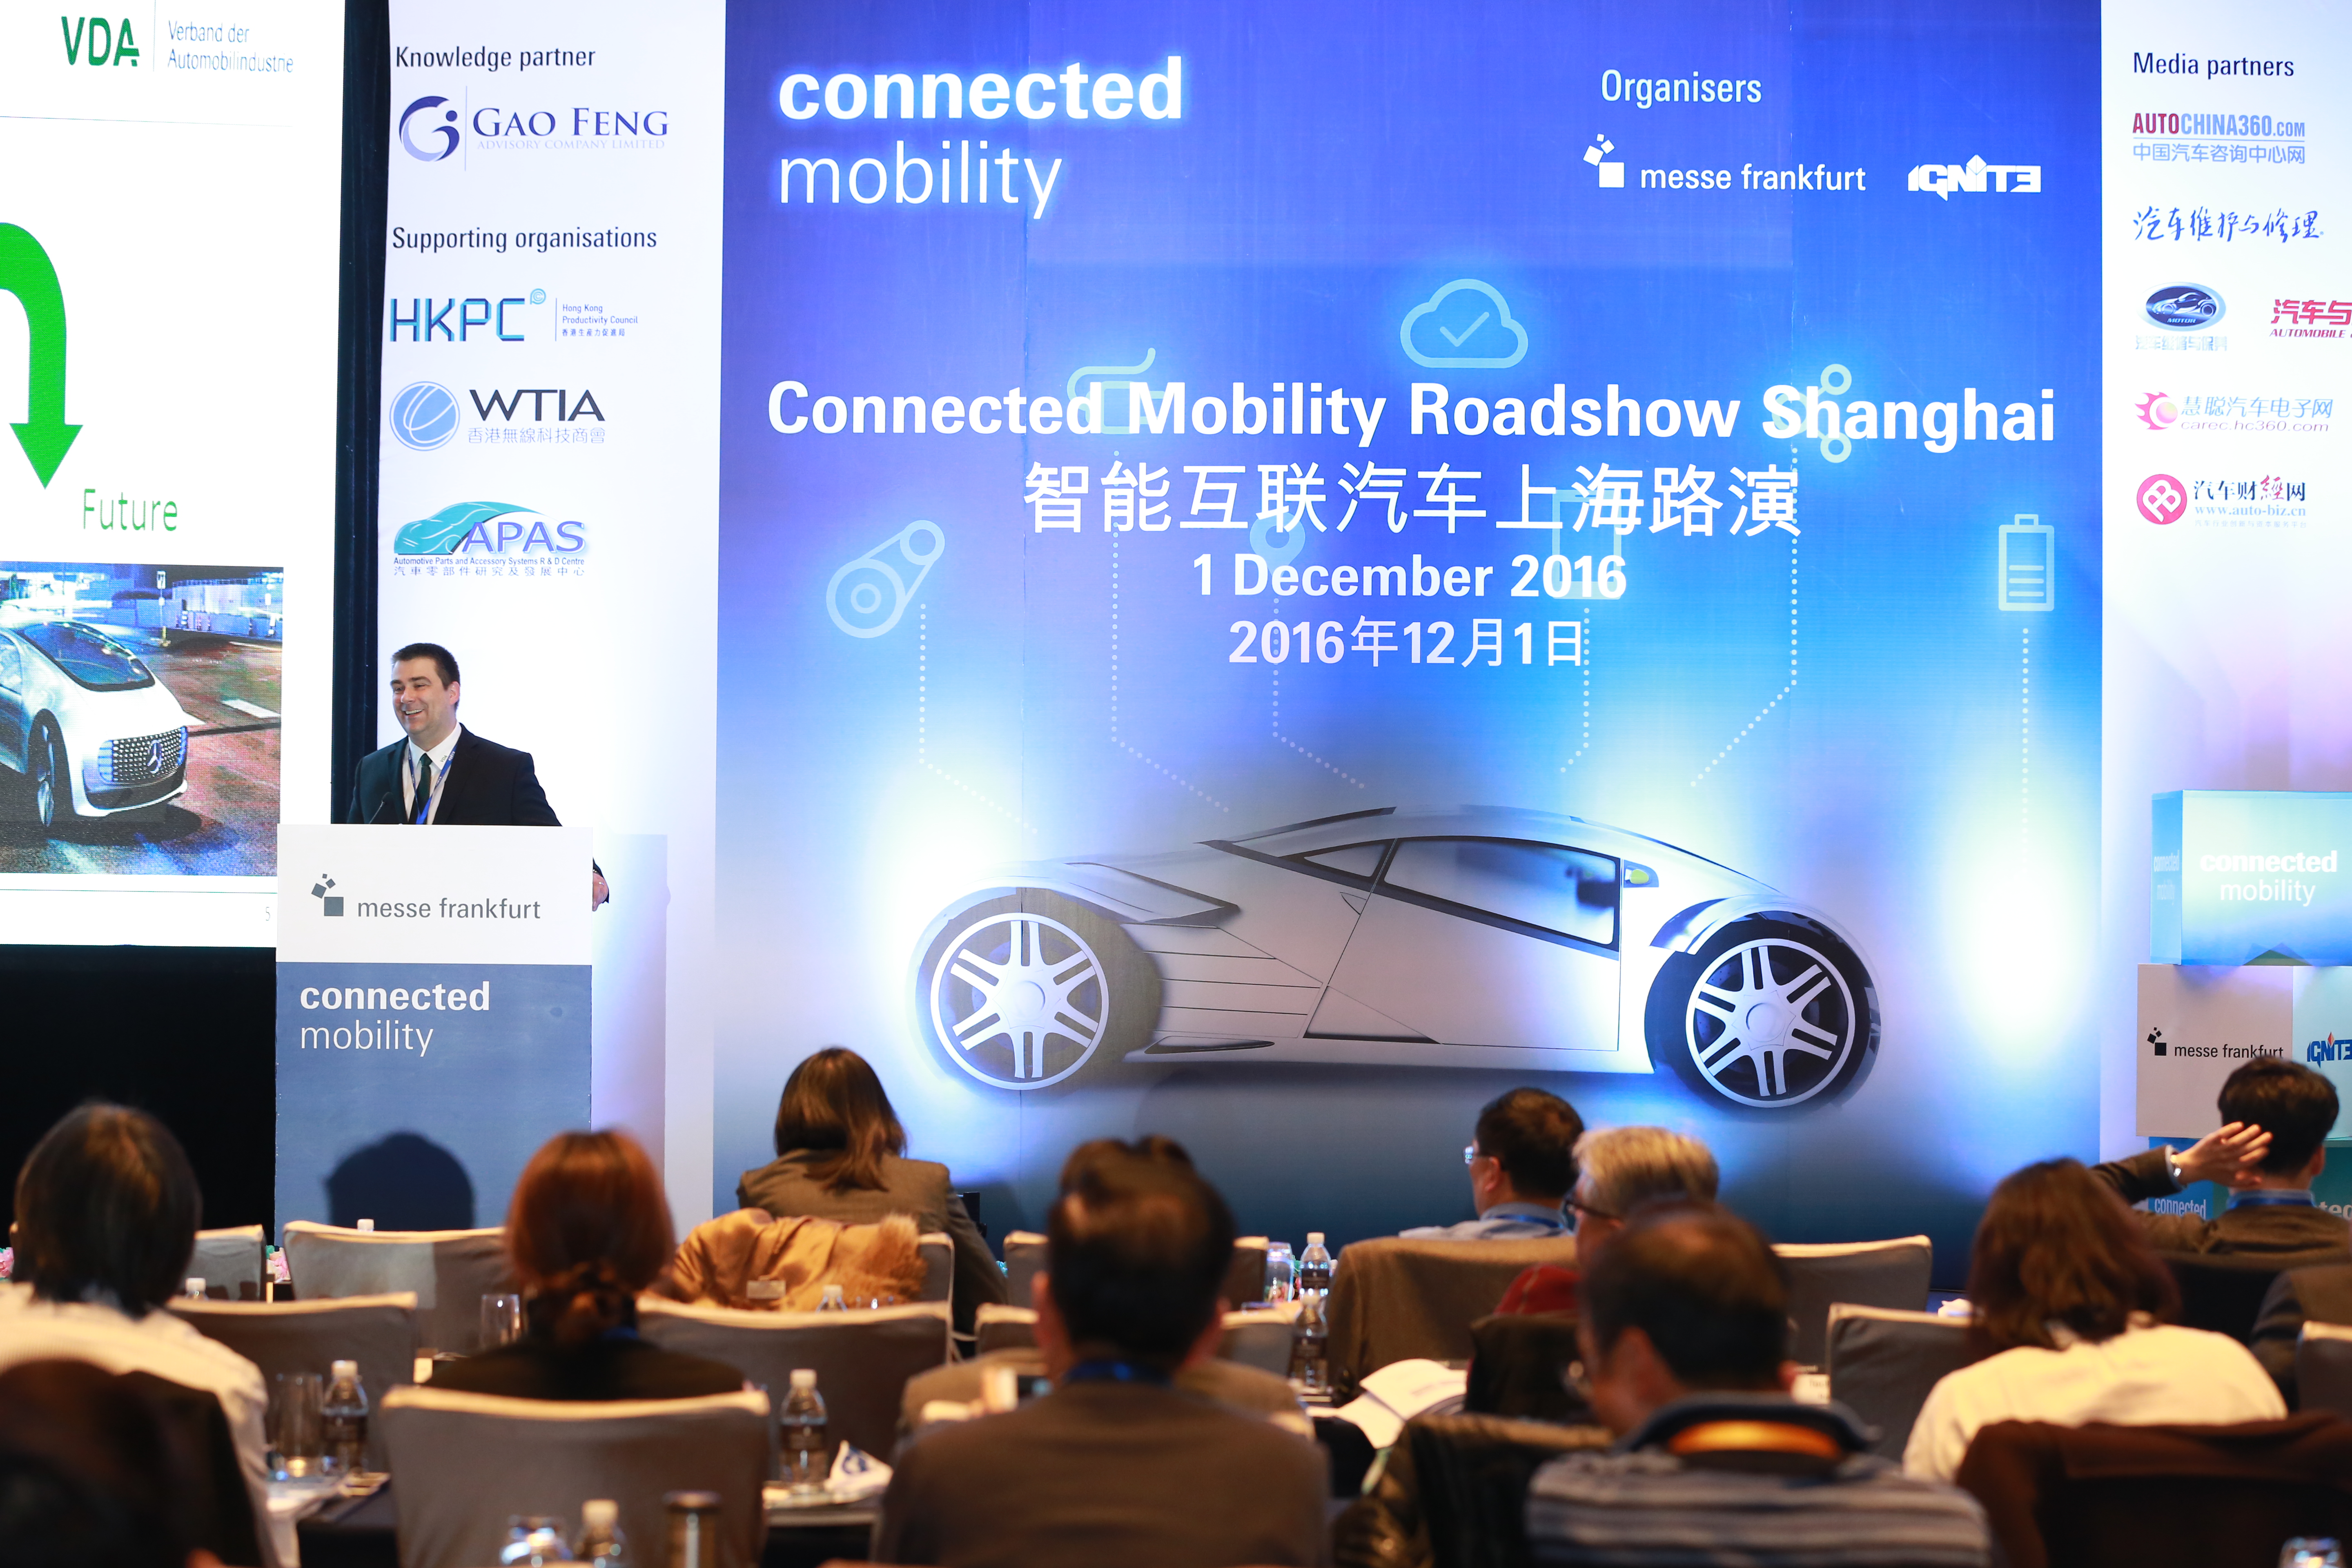 Connected mobility - China